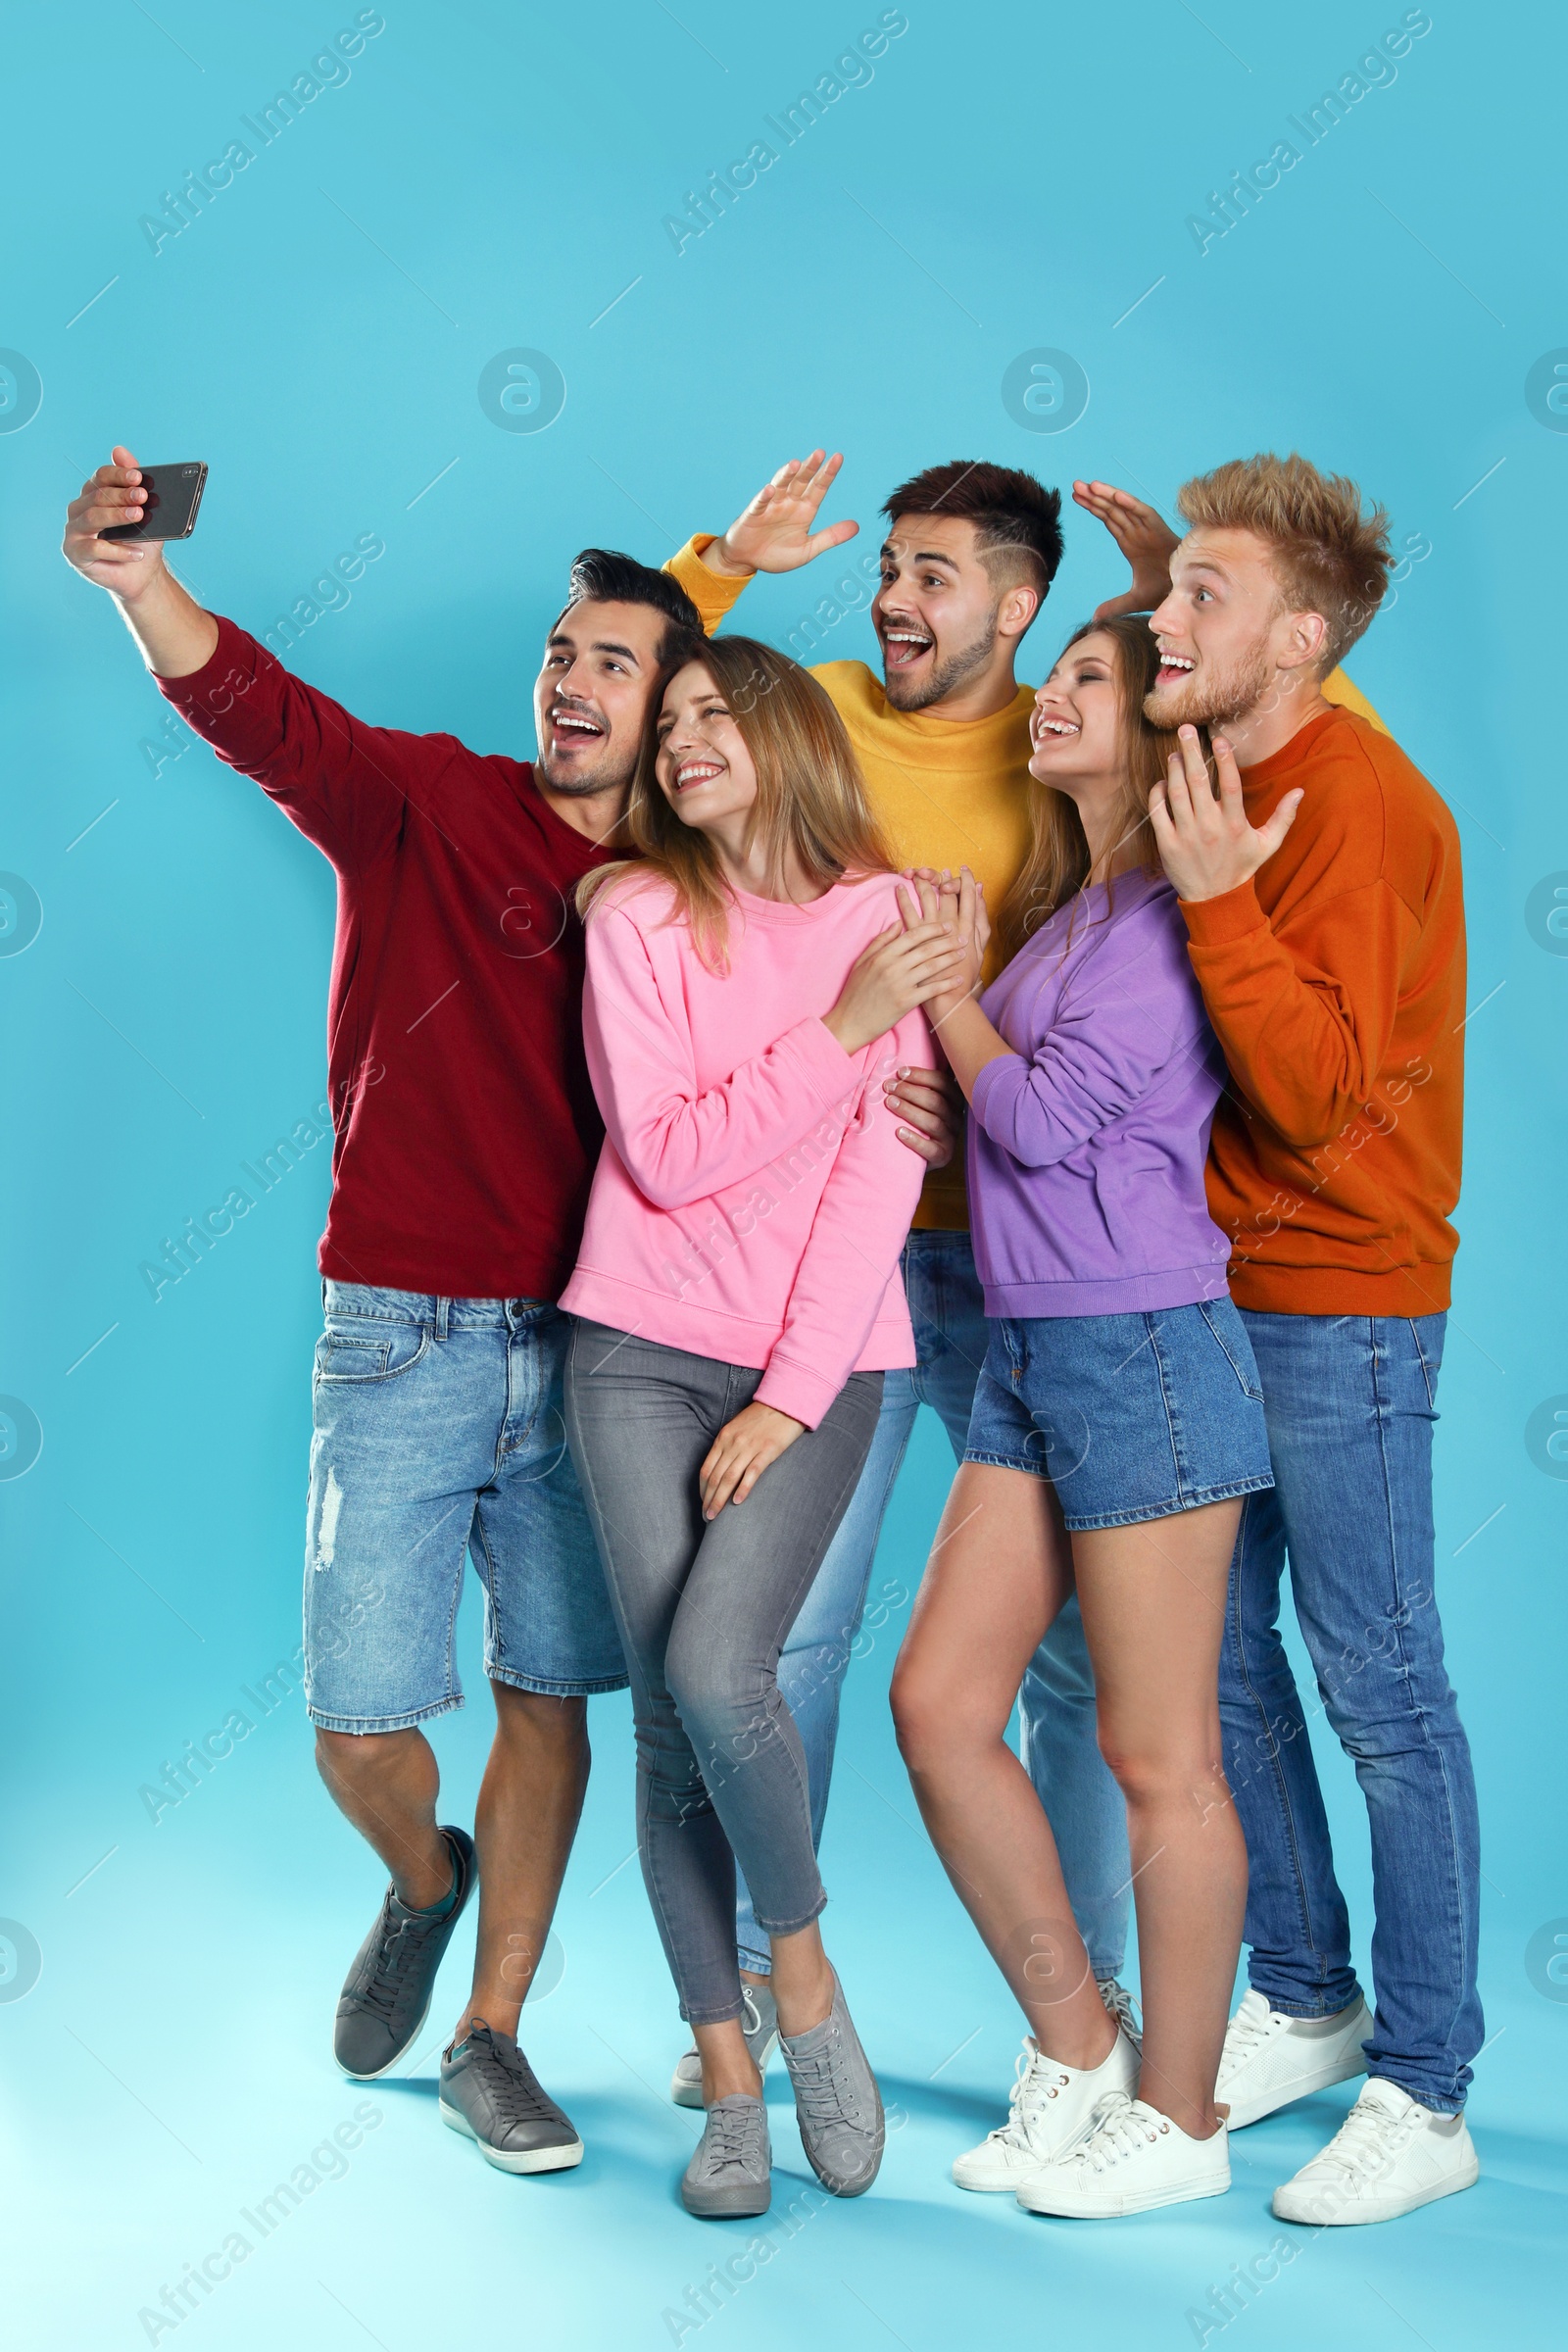 Photo of Happy young people taking selfie on blue background